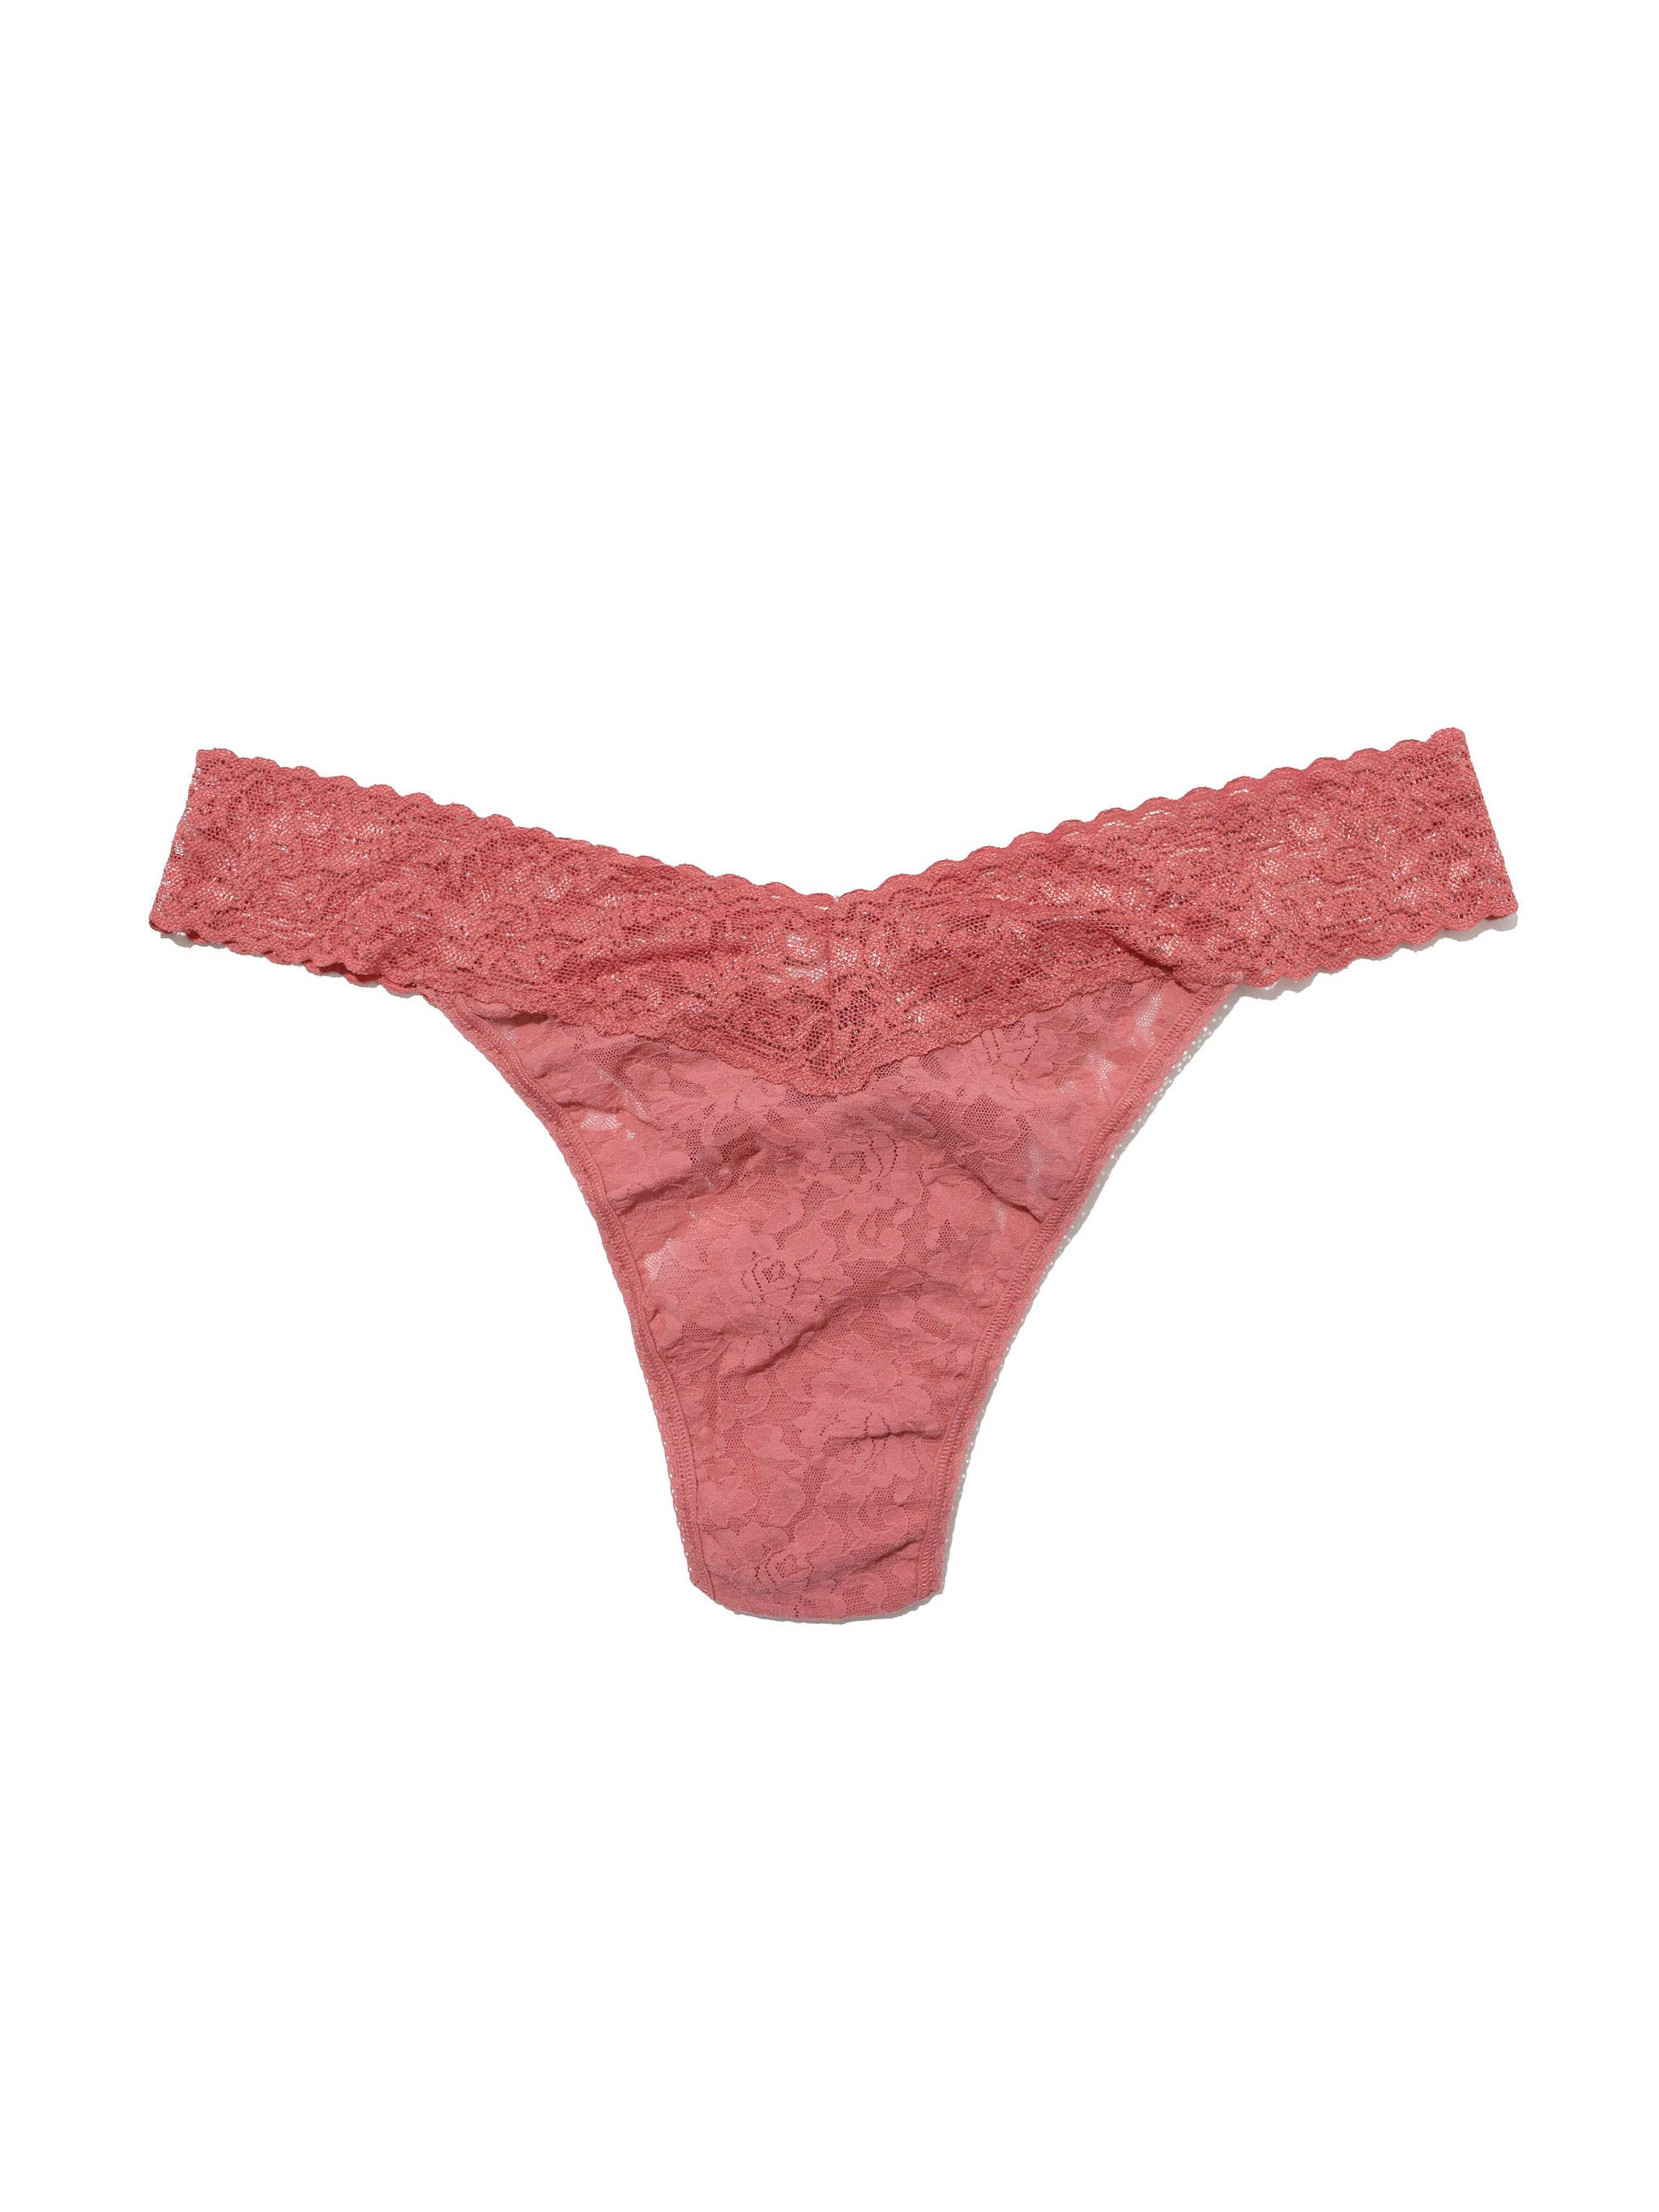 Shop White Lace Thongs Plus Size with great discounts and prices